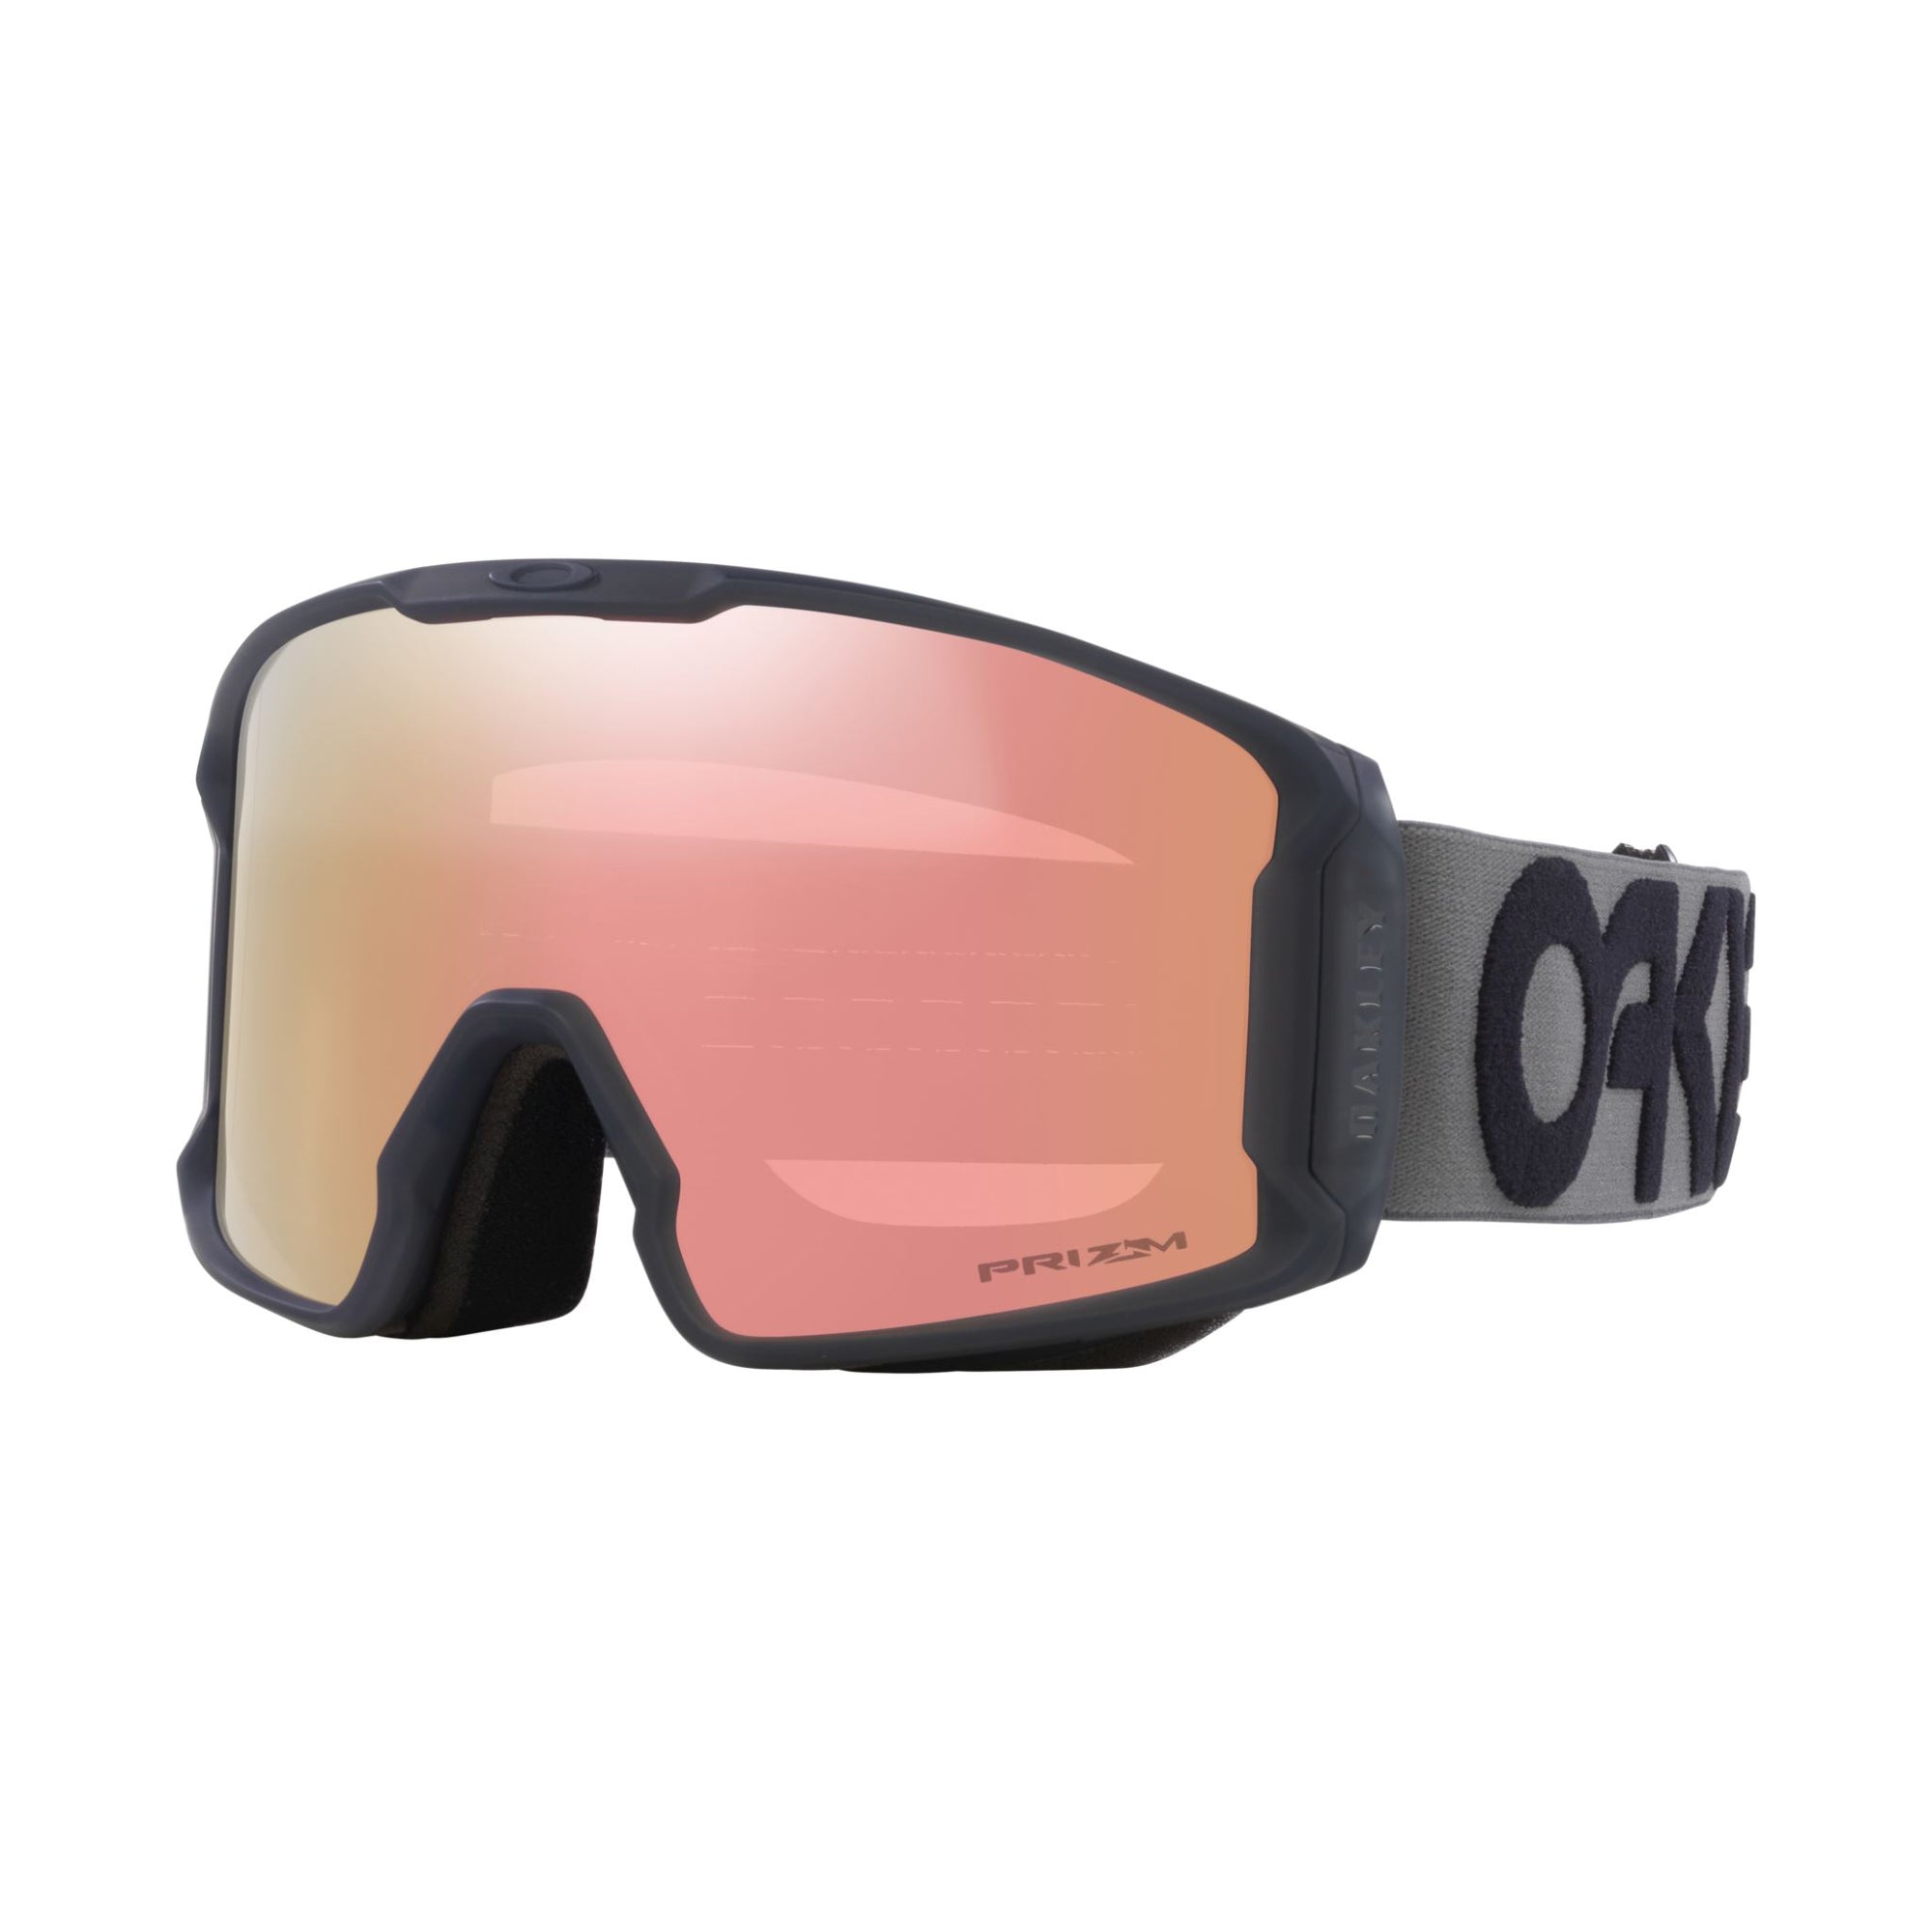 Oakley Line Miner L (Large Fit) Goggle - Forged Iron Prizm Rose Gold Goggles Oakley 